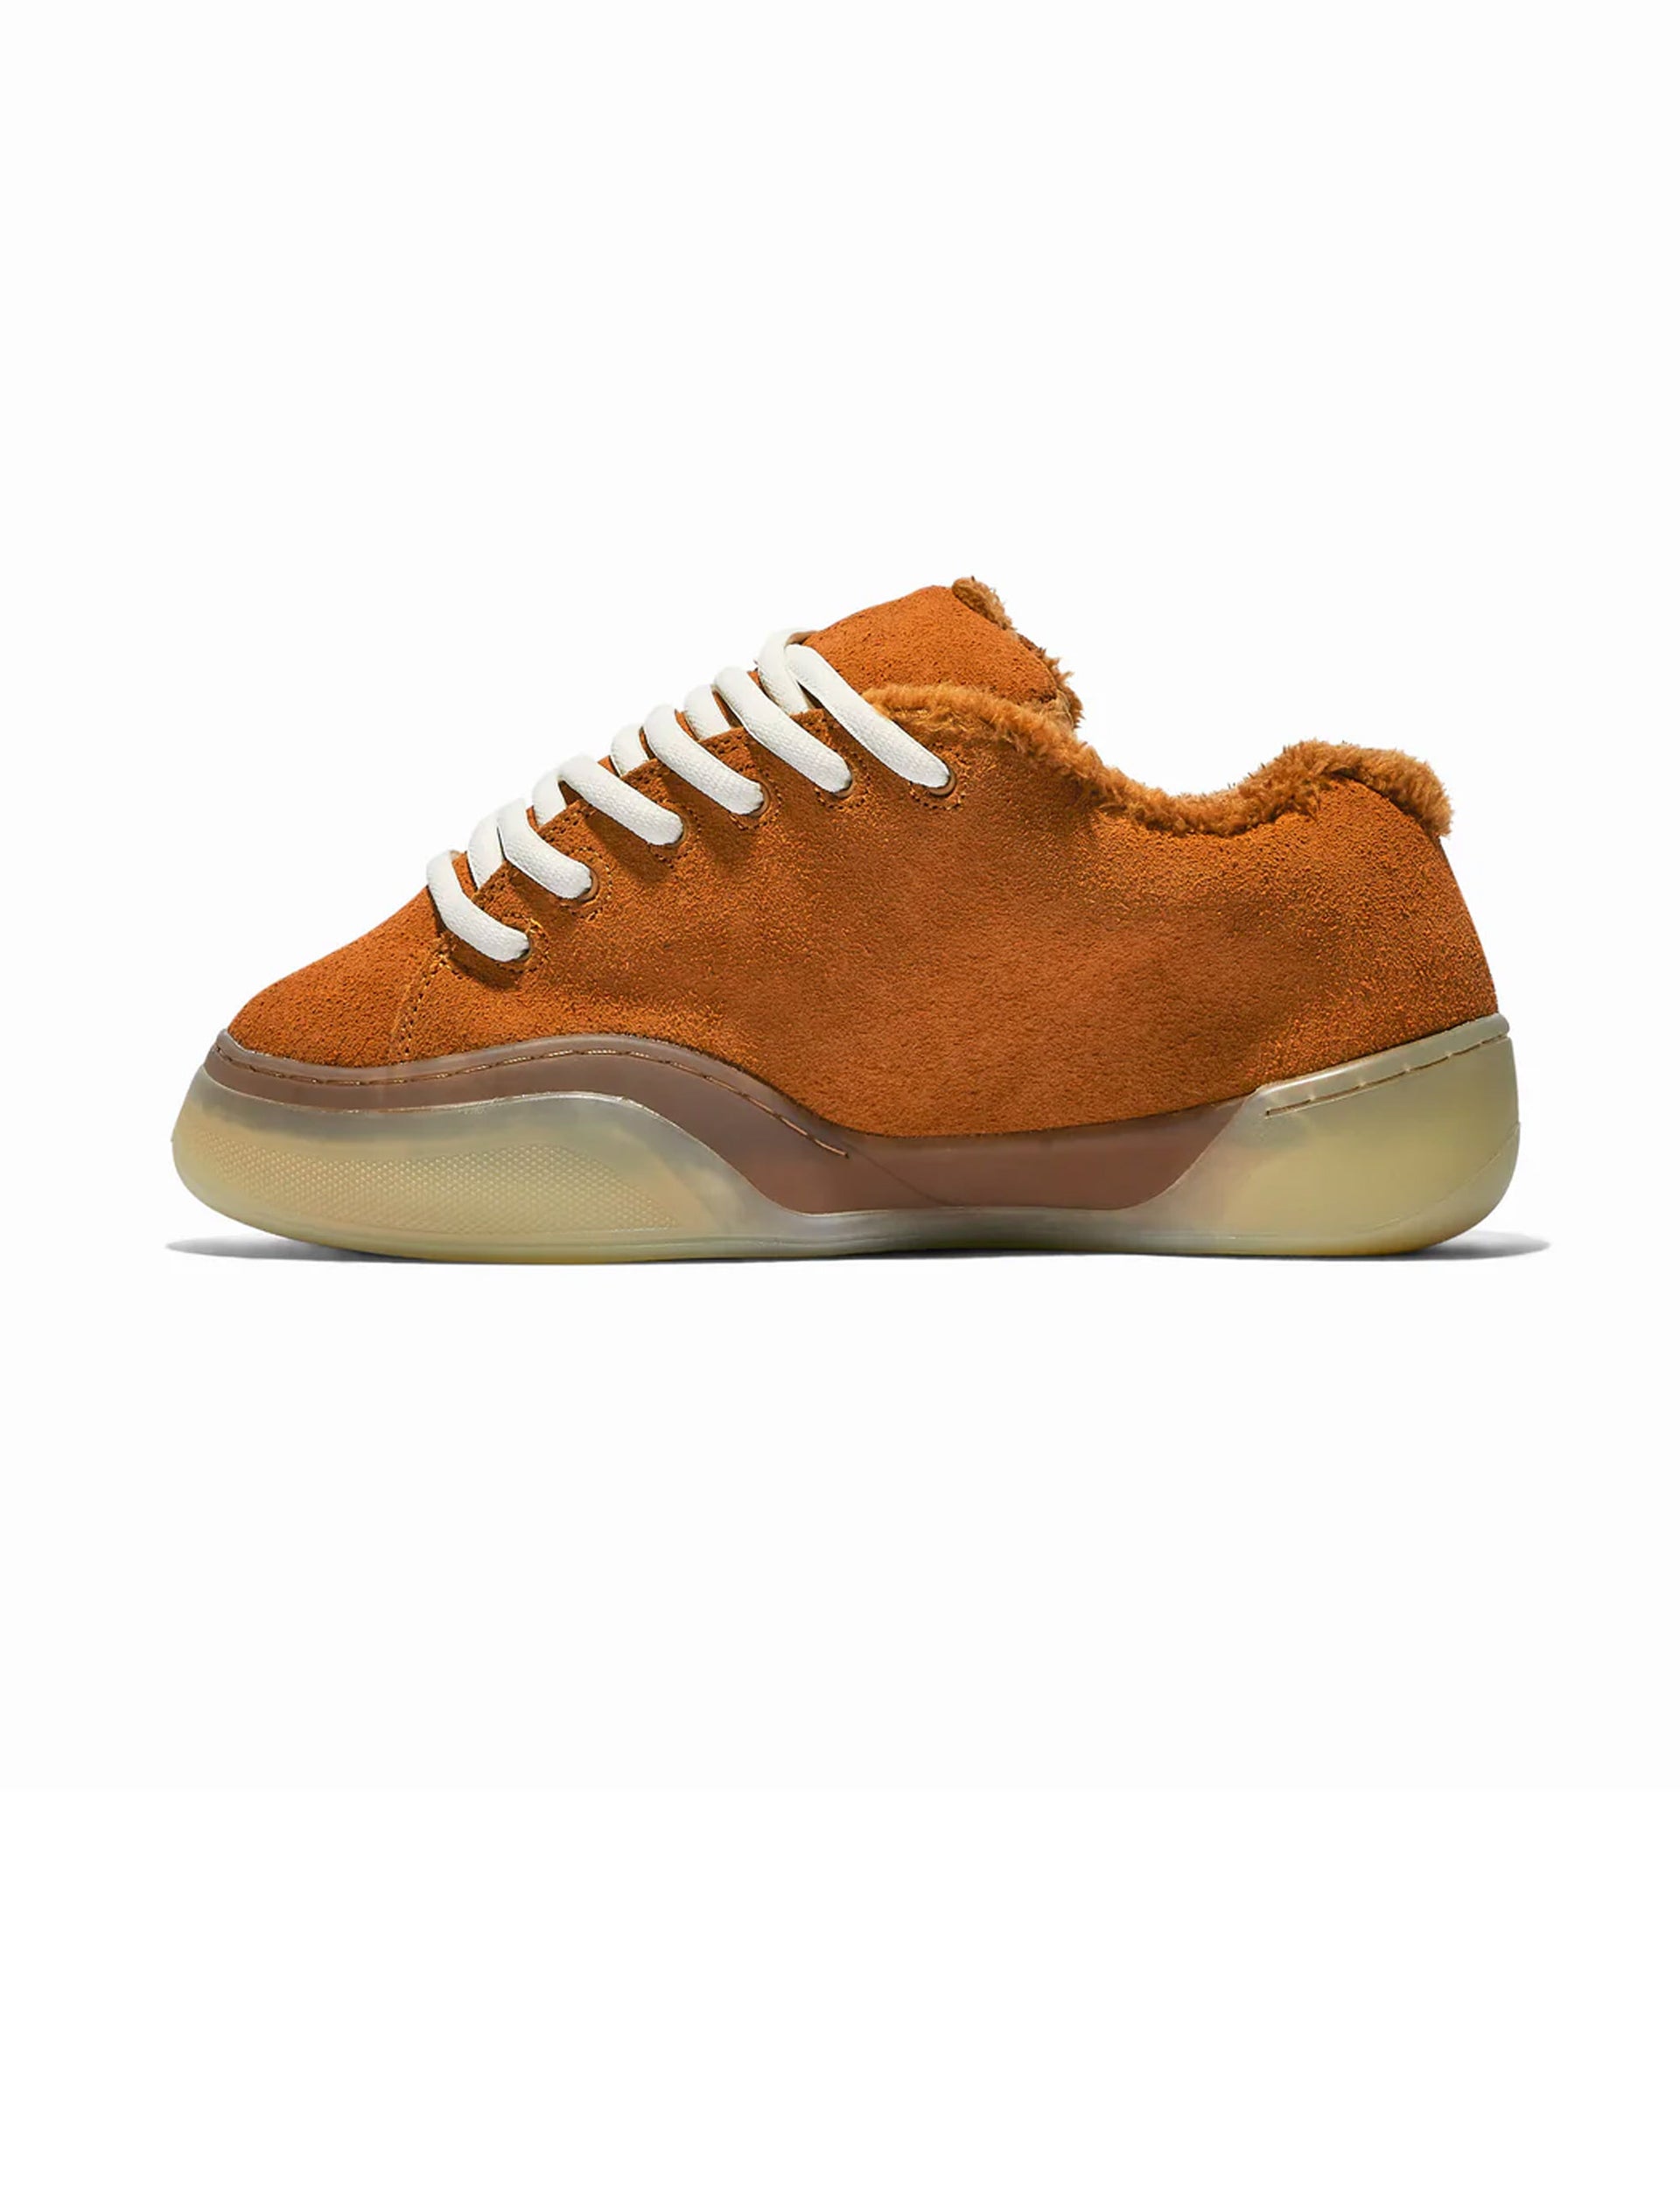 ERL UNISEX SUEDE SKATE SNEAKER LEATHER YELLOW